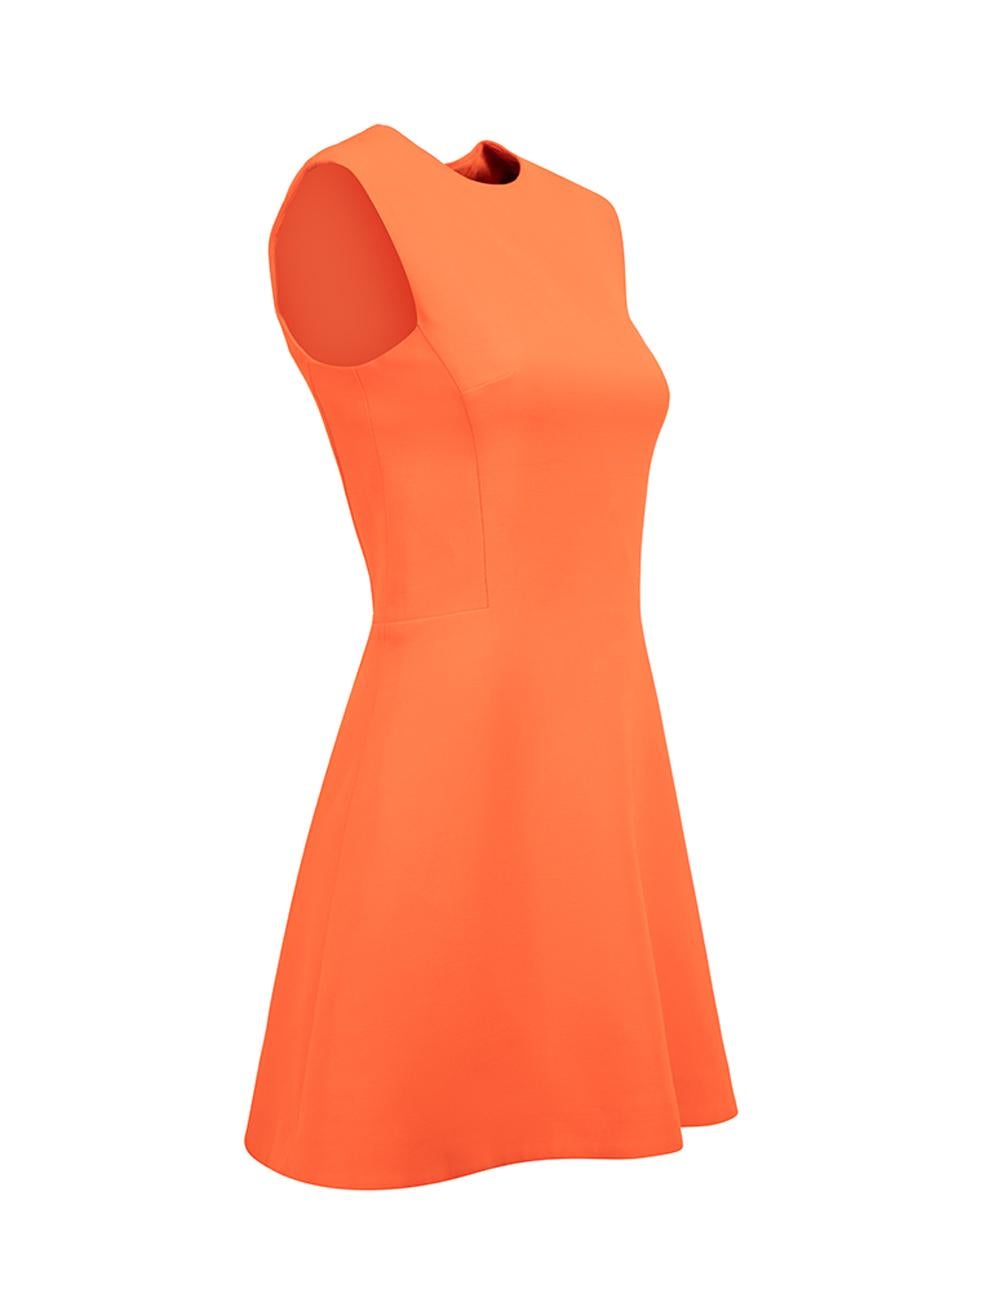 CONDITION is Very good. Minimal wear to dress is evident. Minimal tarnishing to zip hardware and minor pilling to lining on this used Victoria Beckham designer resale item.



Details


Orange

Silk

Mini dress

Round neckline

Sleeveless

Back